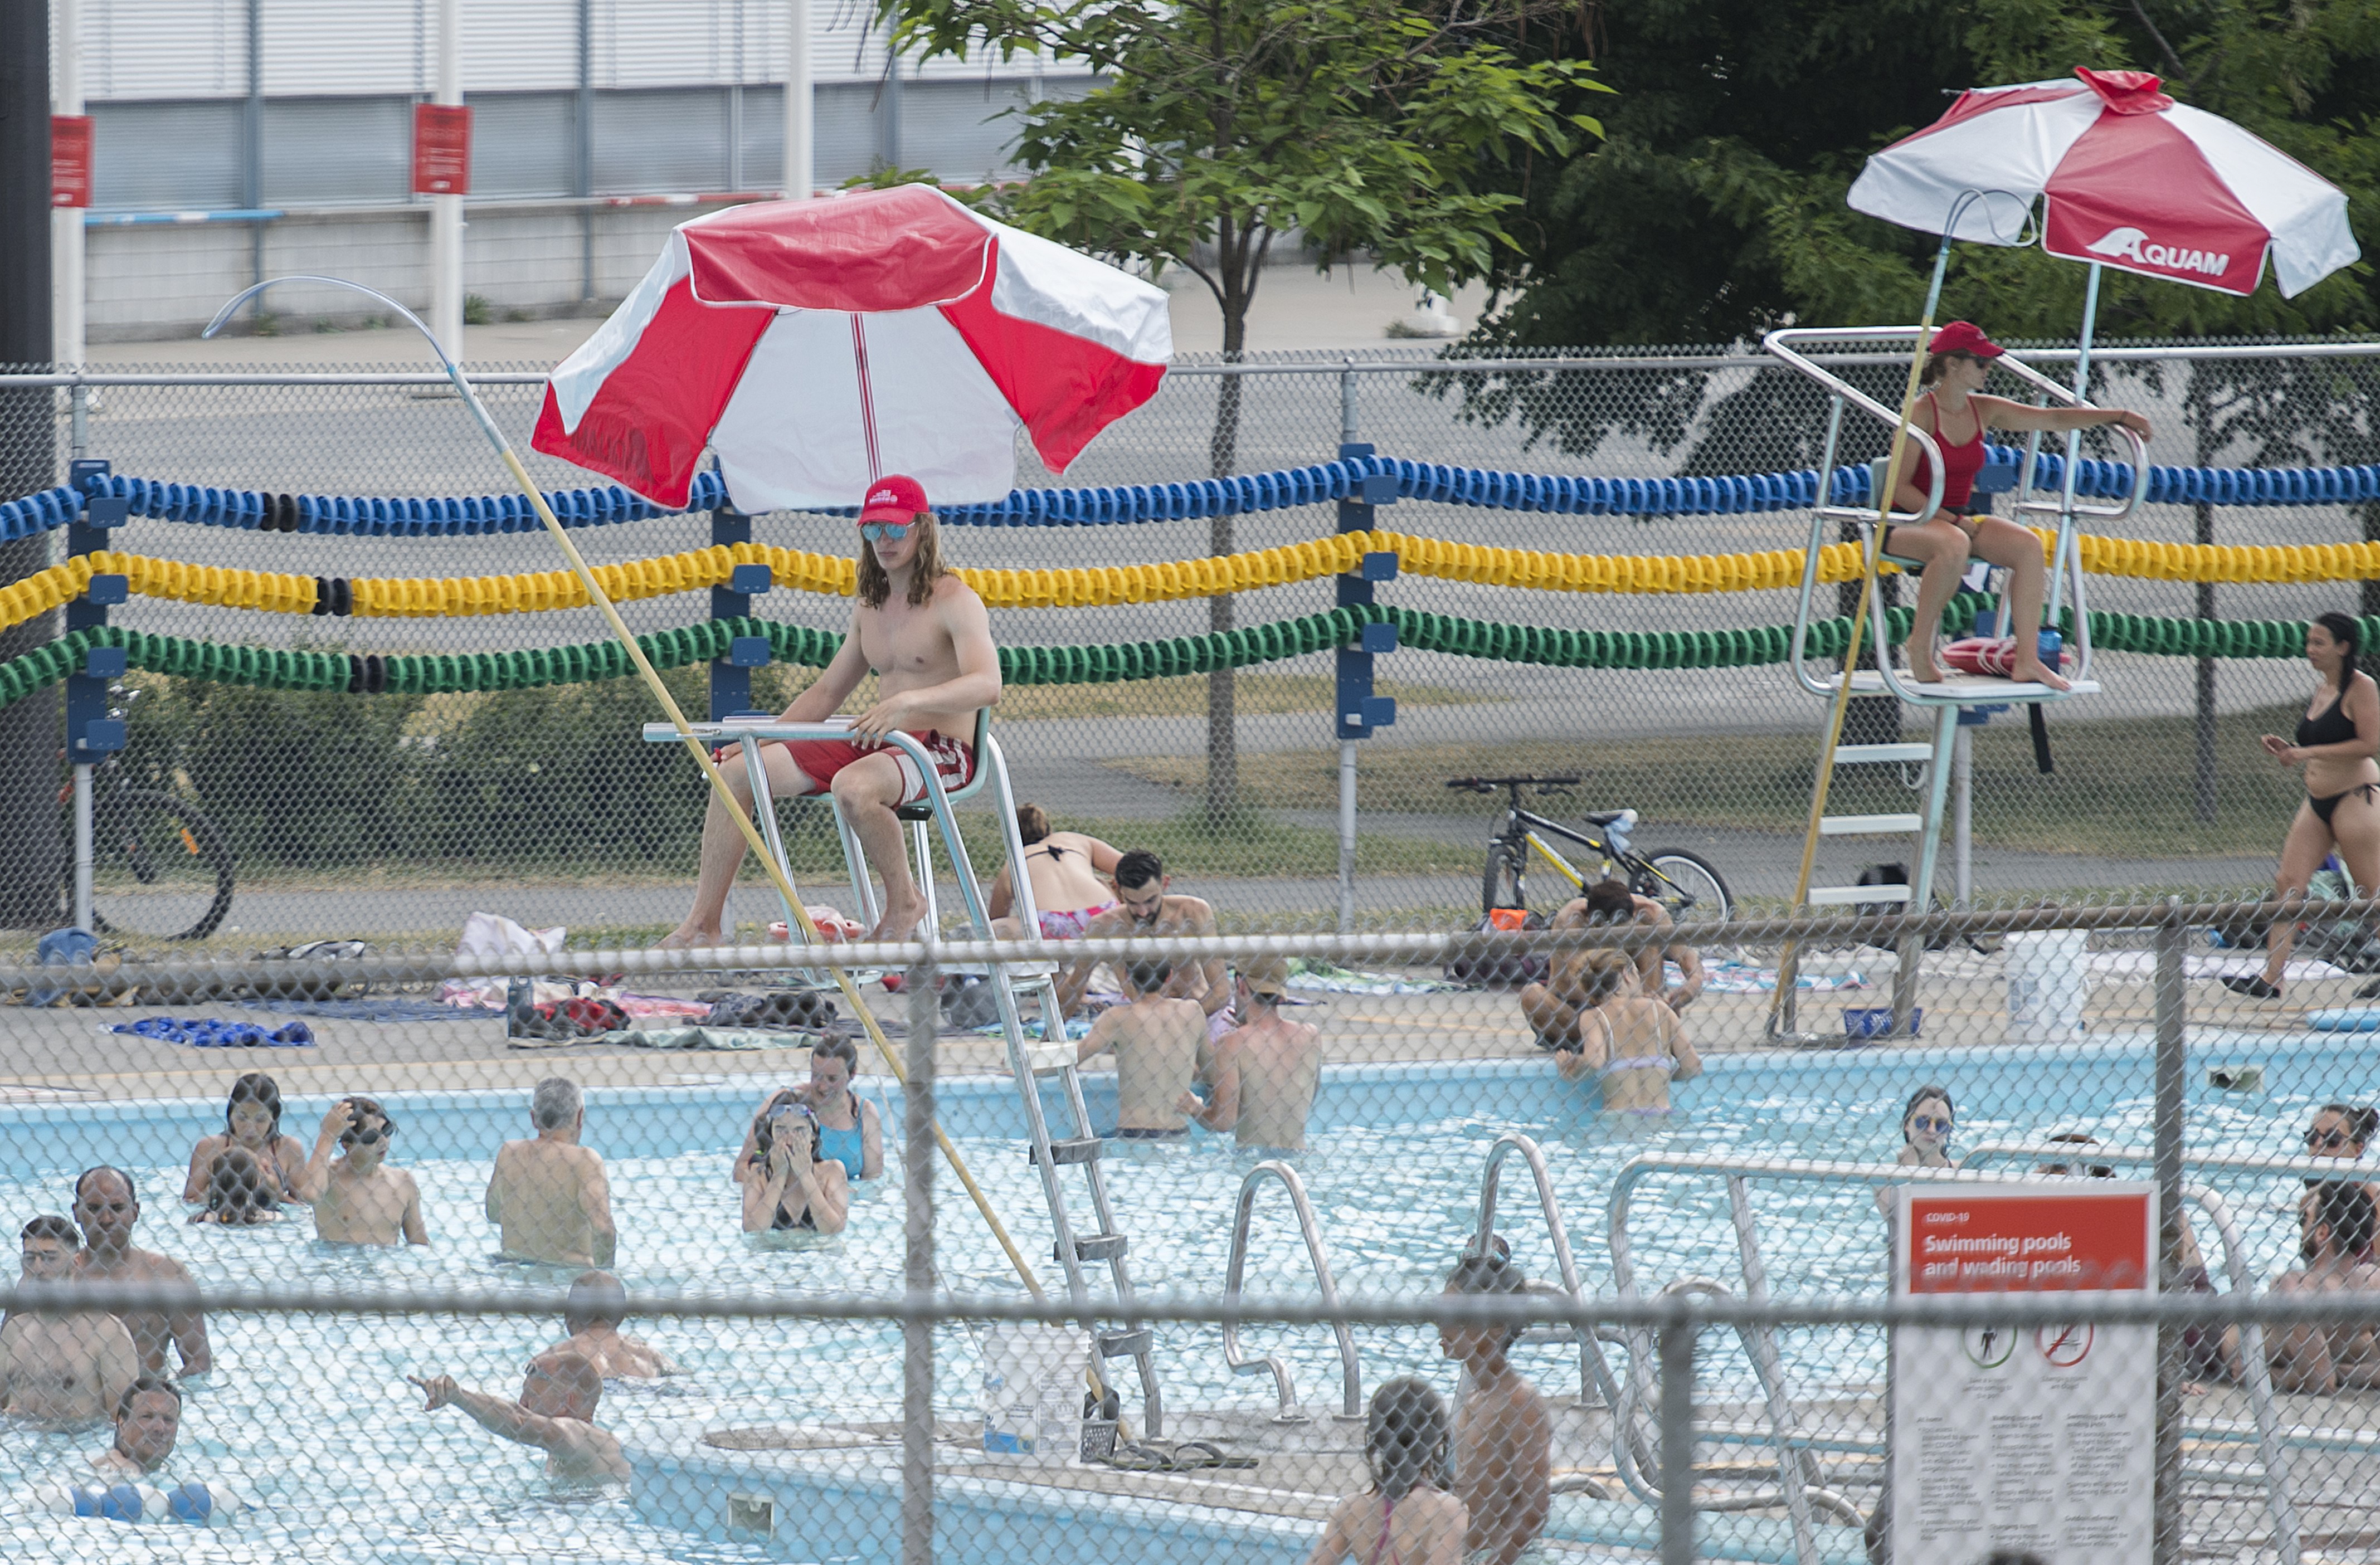 ‘Double the numbers’: Free training helps ease Quebec’s lifeguard shortage